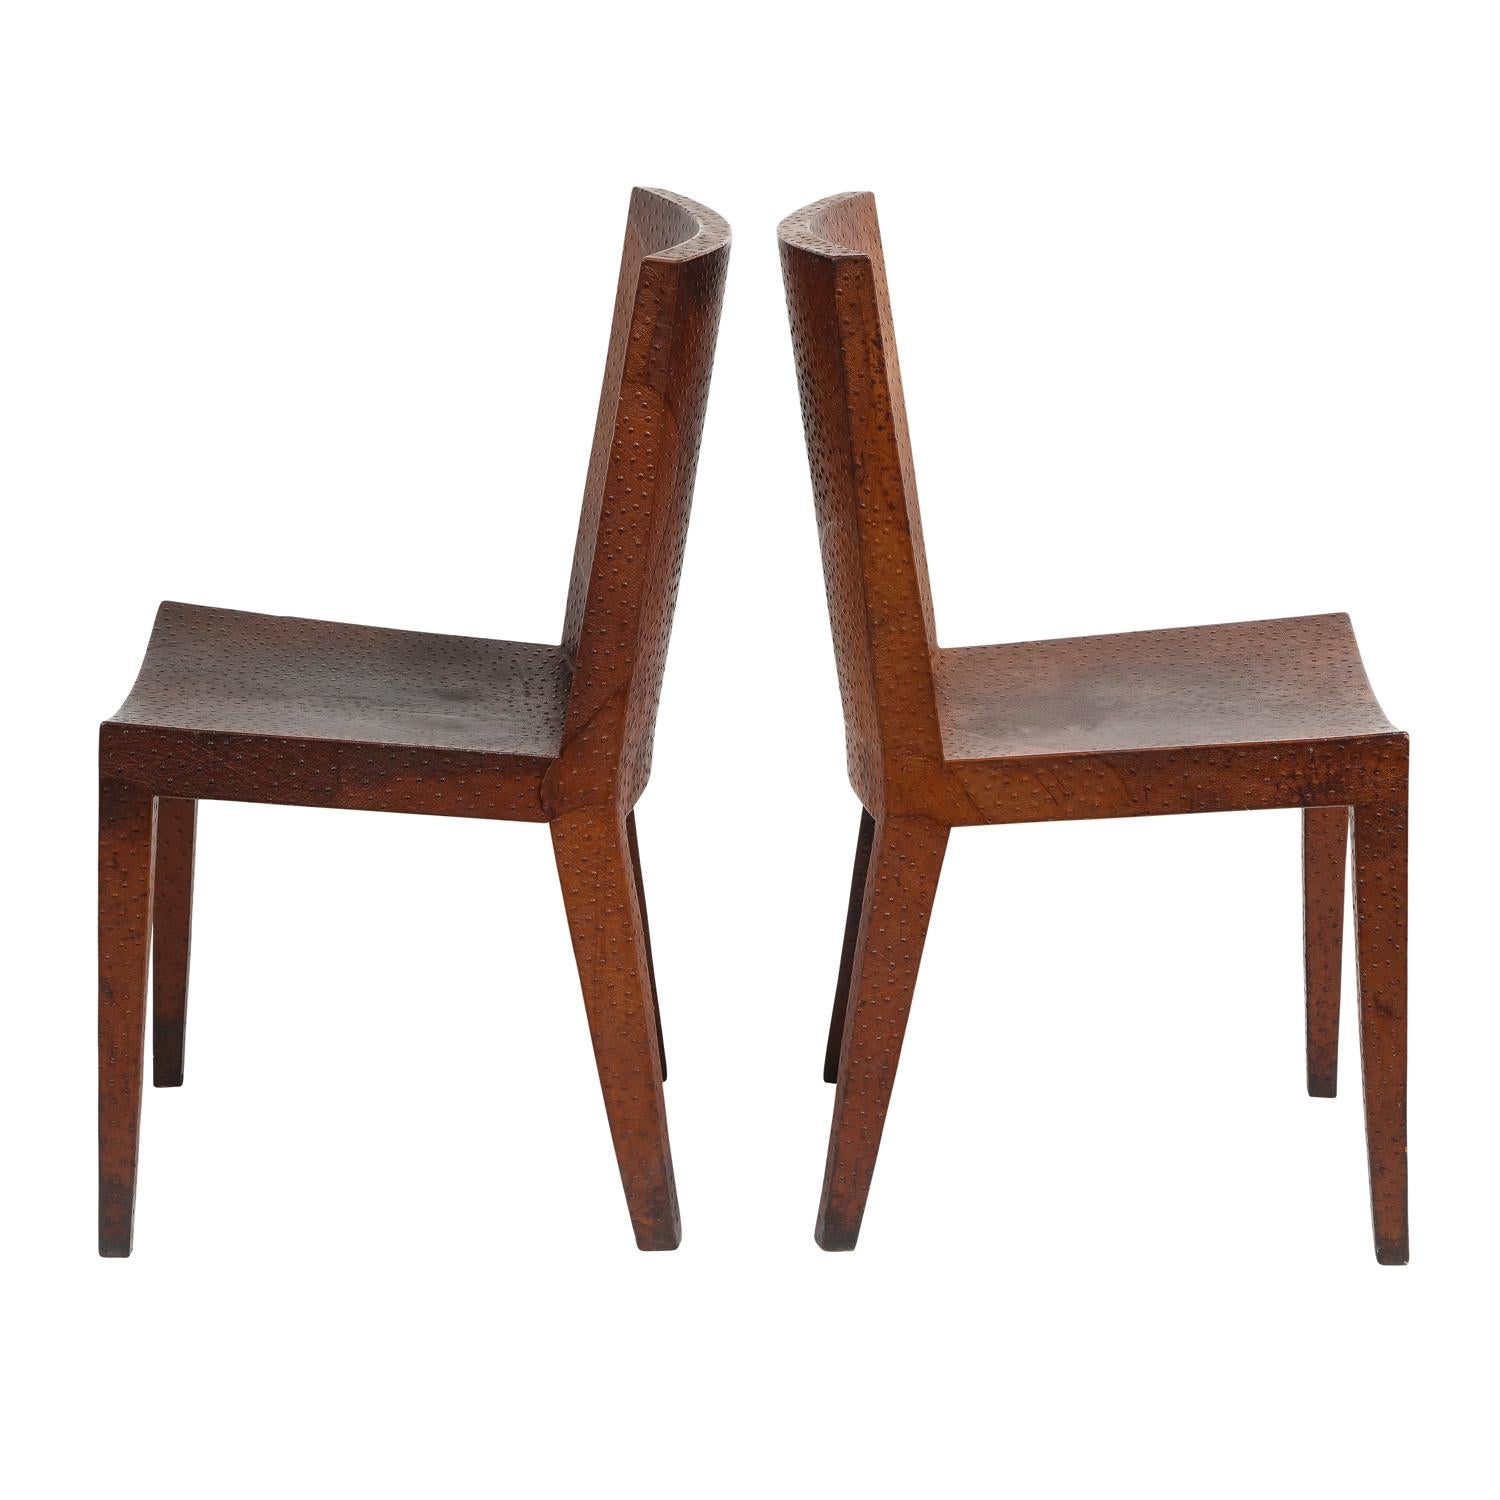 Pair of JMF chairs in ostrich skin by Karl Springer, American 1982 (signed “Karl Springer 1982” on leather label beneath seat). These chairs are exquisitely crafted.

Reference: Karl Springer red binder catalog, 1980’s, seating section, a full